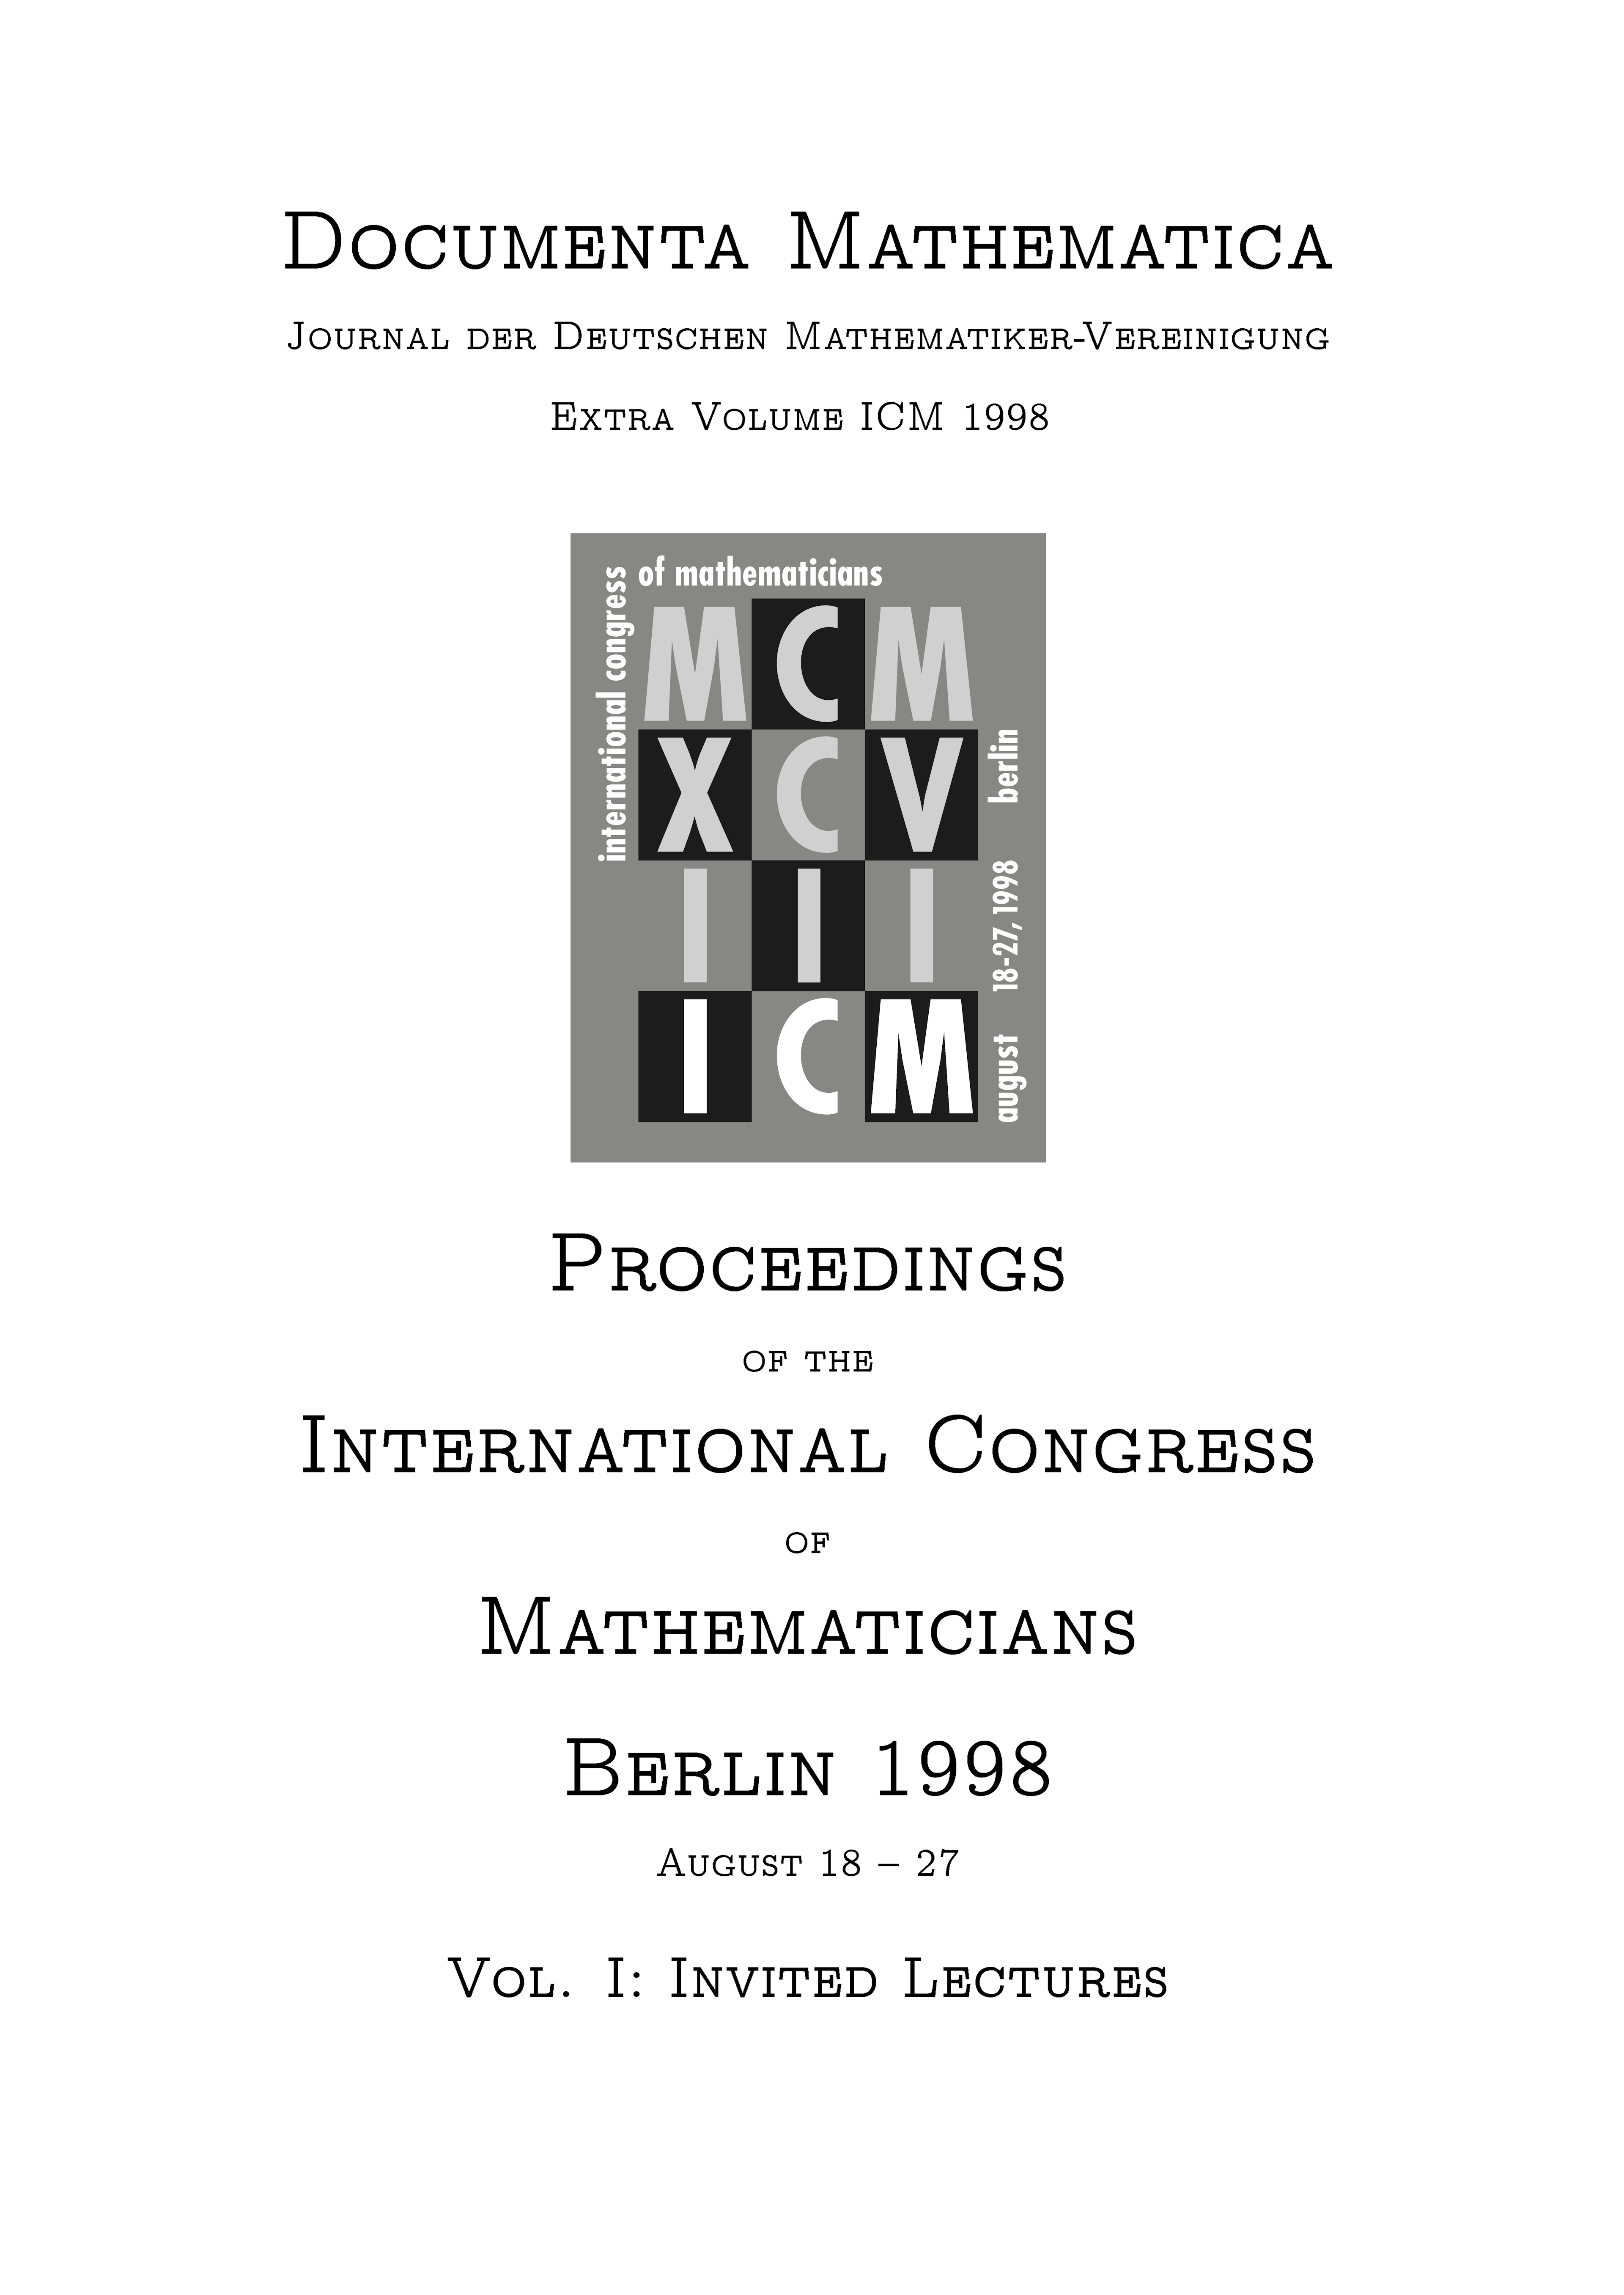 Errata to: “Lattice point problems and the central limit theorem in Euclidean spaces” cover